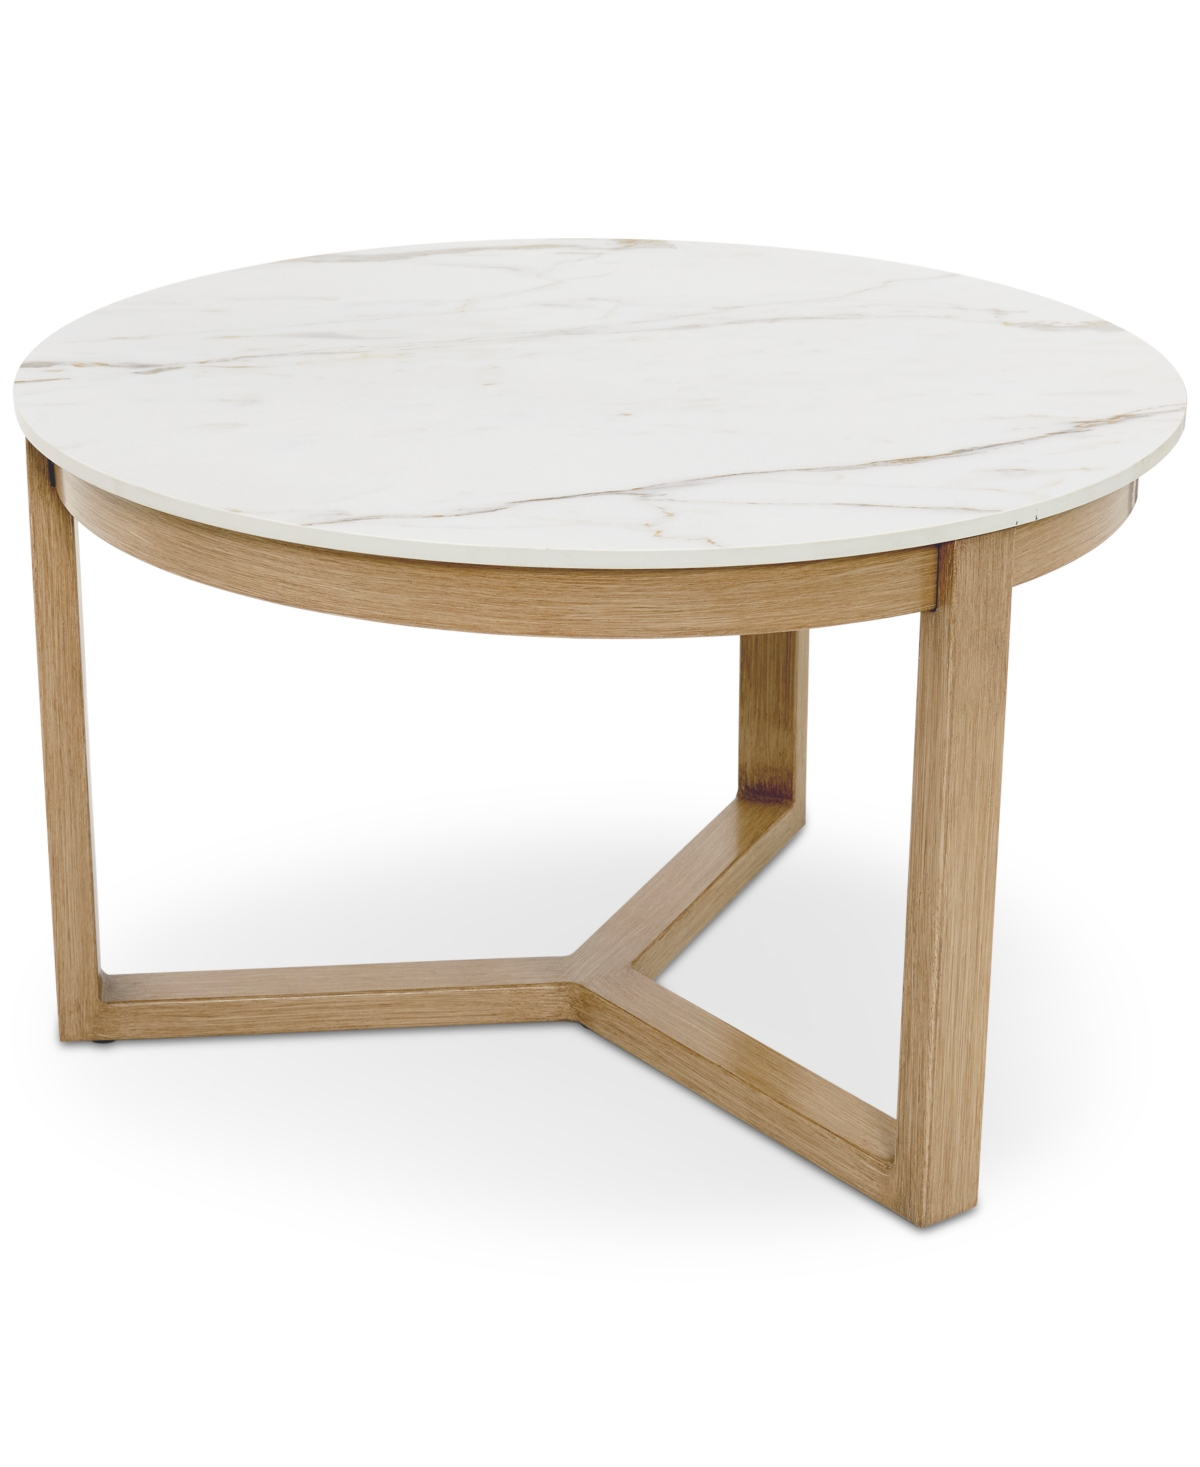 Agio Reid Outdoor 30" Round Porcelain Top Nesting Table, Created For Macy's In Light Beige